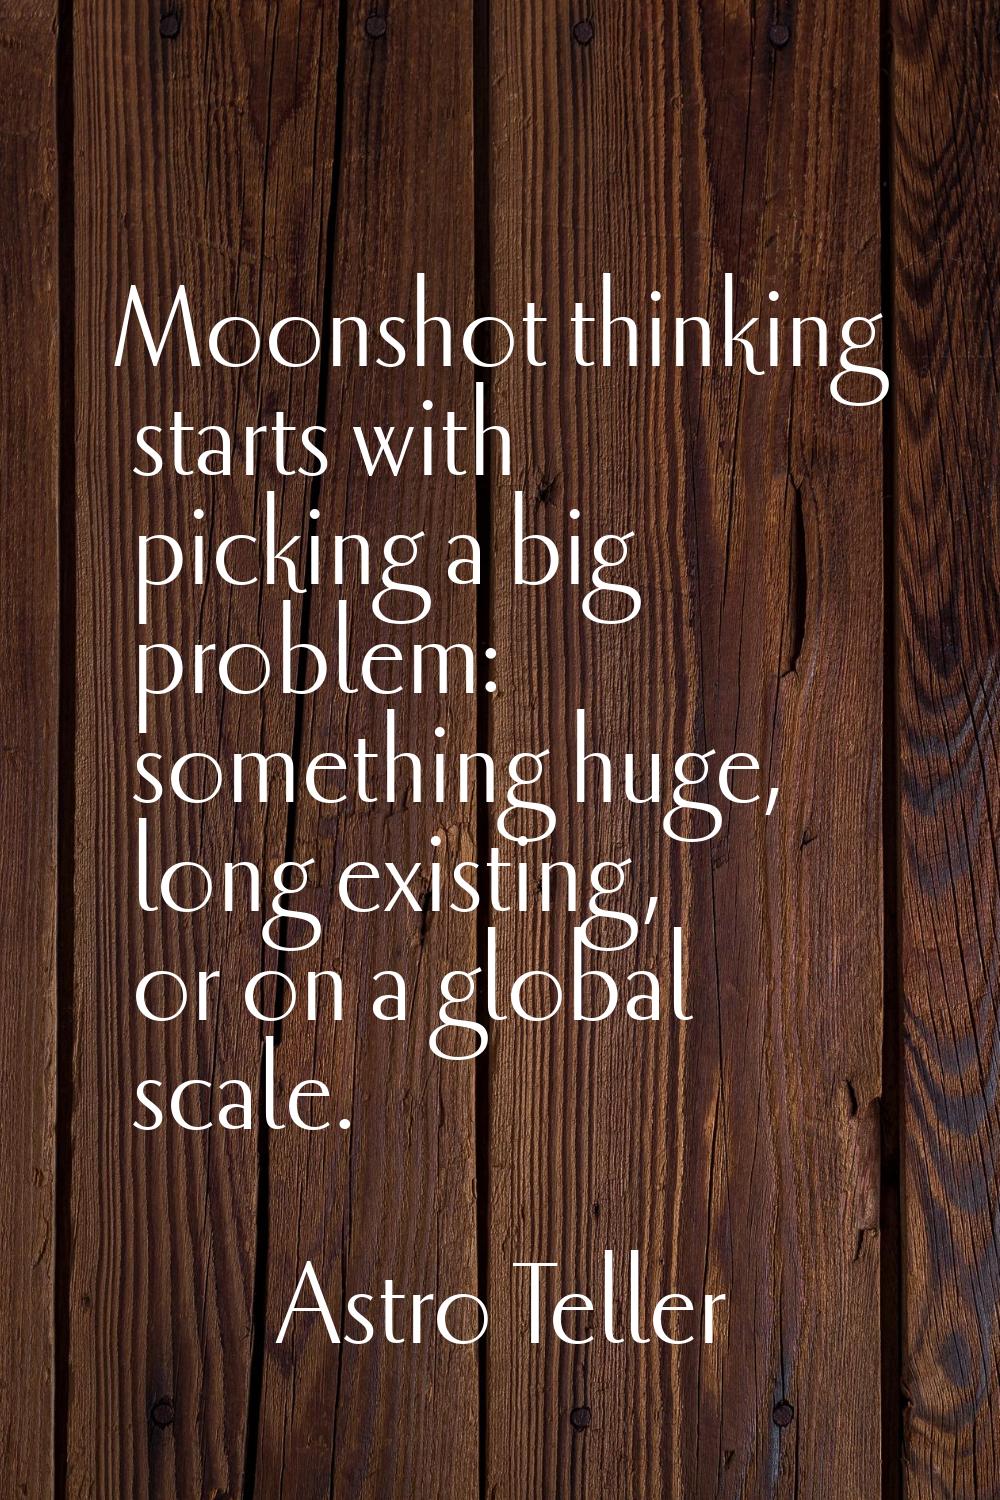 Moonshot thinking starts with picking a big problem: something huge, long existing, or on a global 